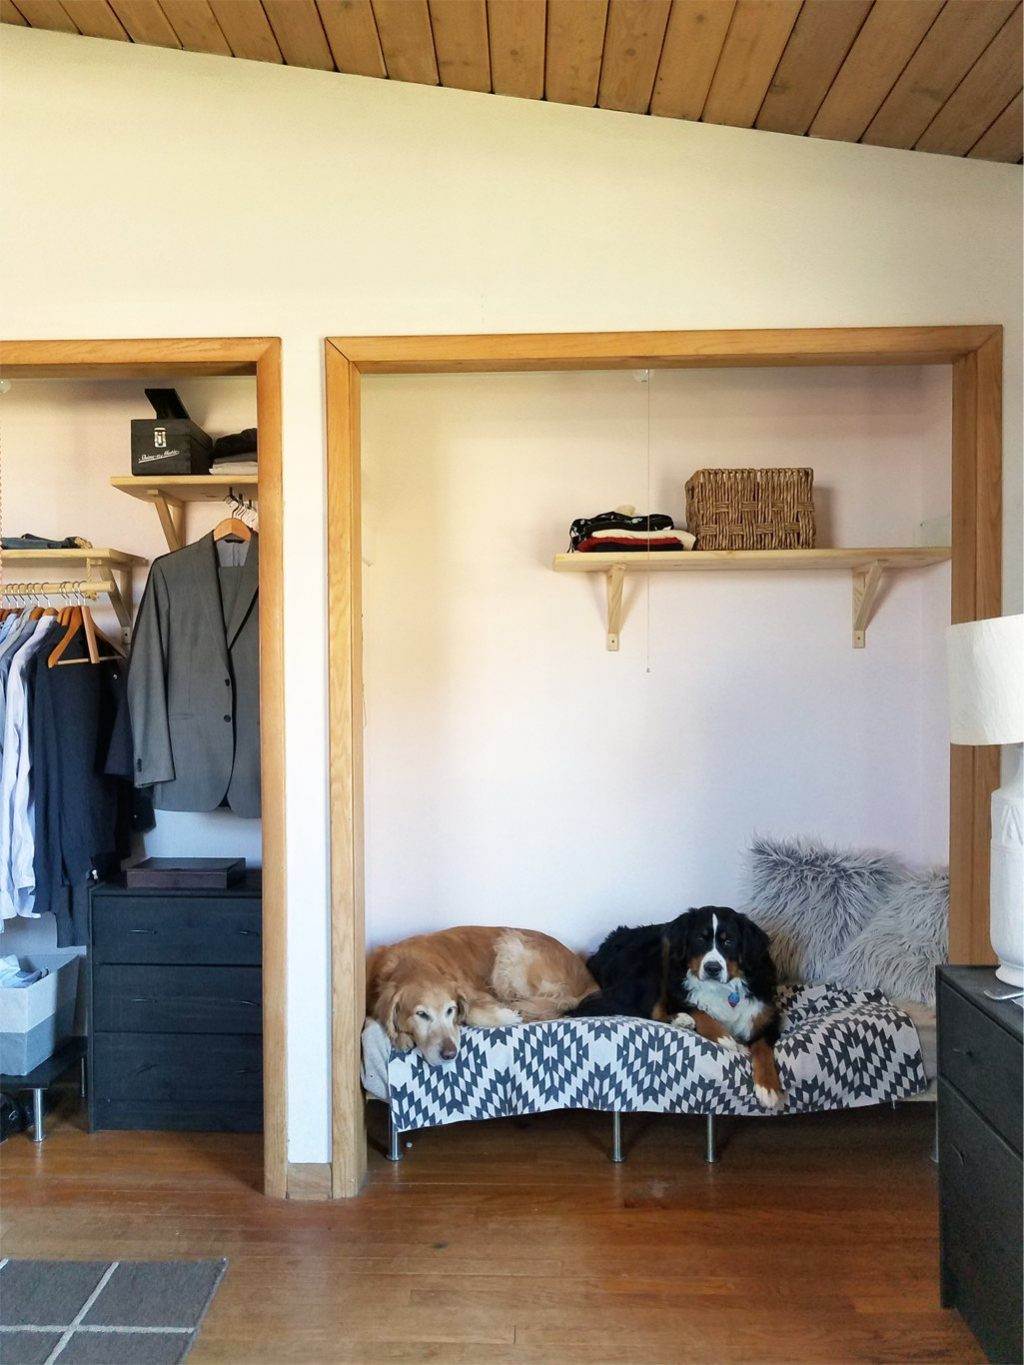 Elevated Dog Bed DIY
 DIY raised dog bed from MDF and inexpensive legs from IKEA